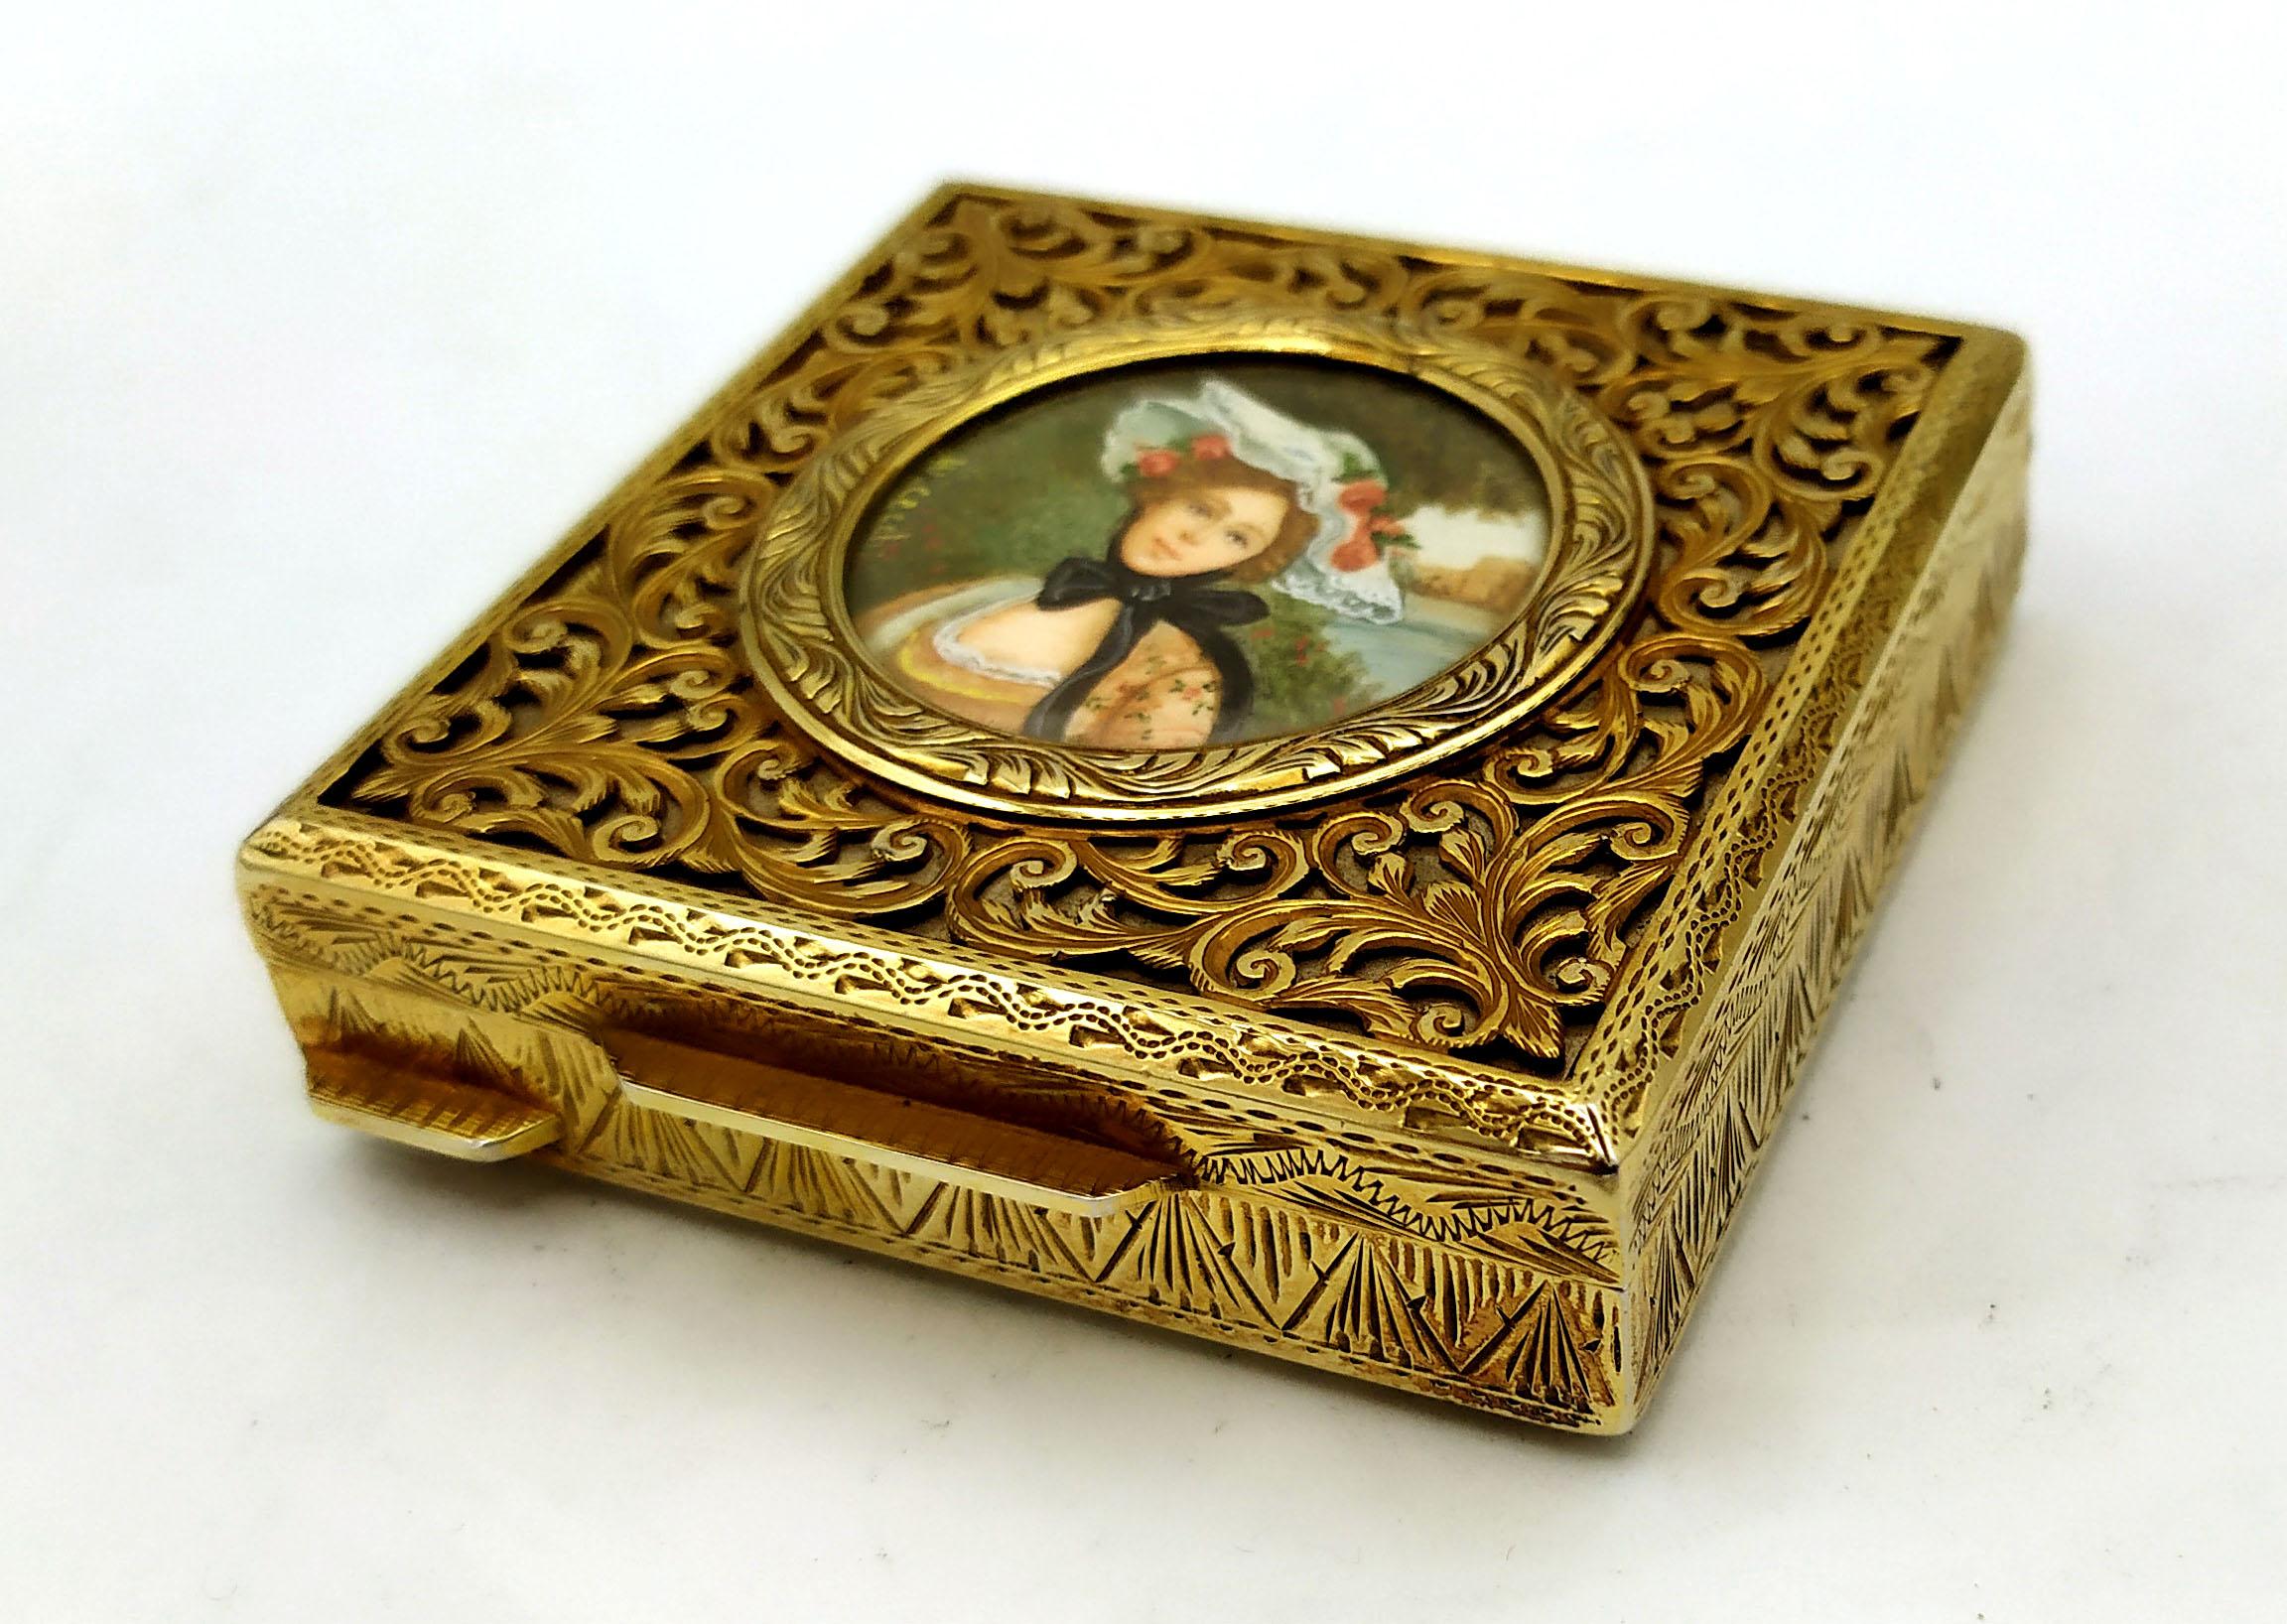 Square snuff box in 925/1000 sterling silver gold plated with perforated lid, embossed and engraved by hand, with fine round miniature diameter cm. 3.8 hand painted in tempera on vegetable ivory by the painter Wilma Cecchi reproducing the 